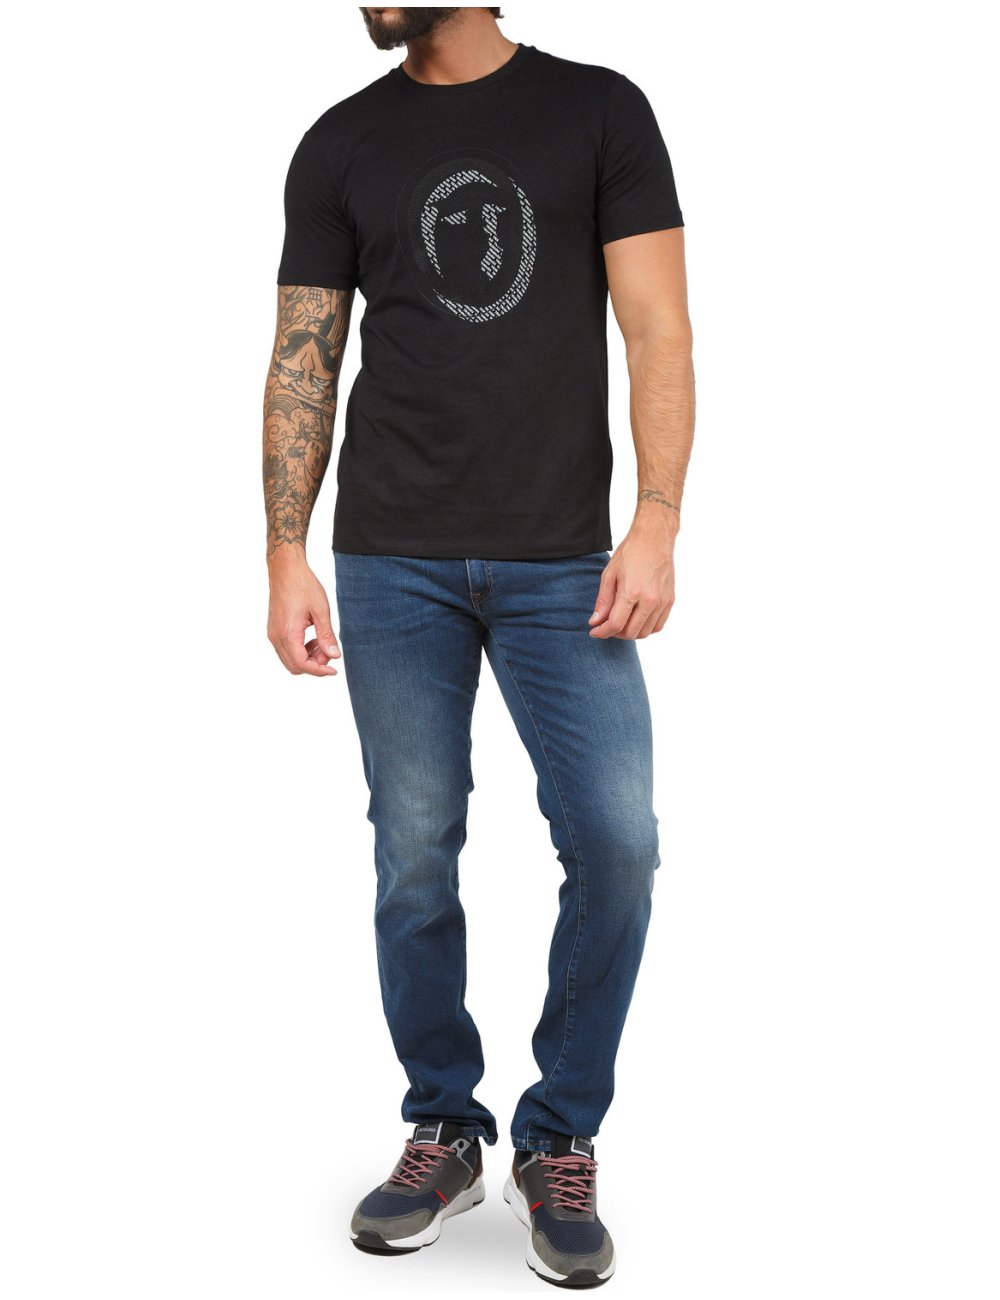 FW21 T-shirt con stampa